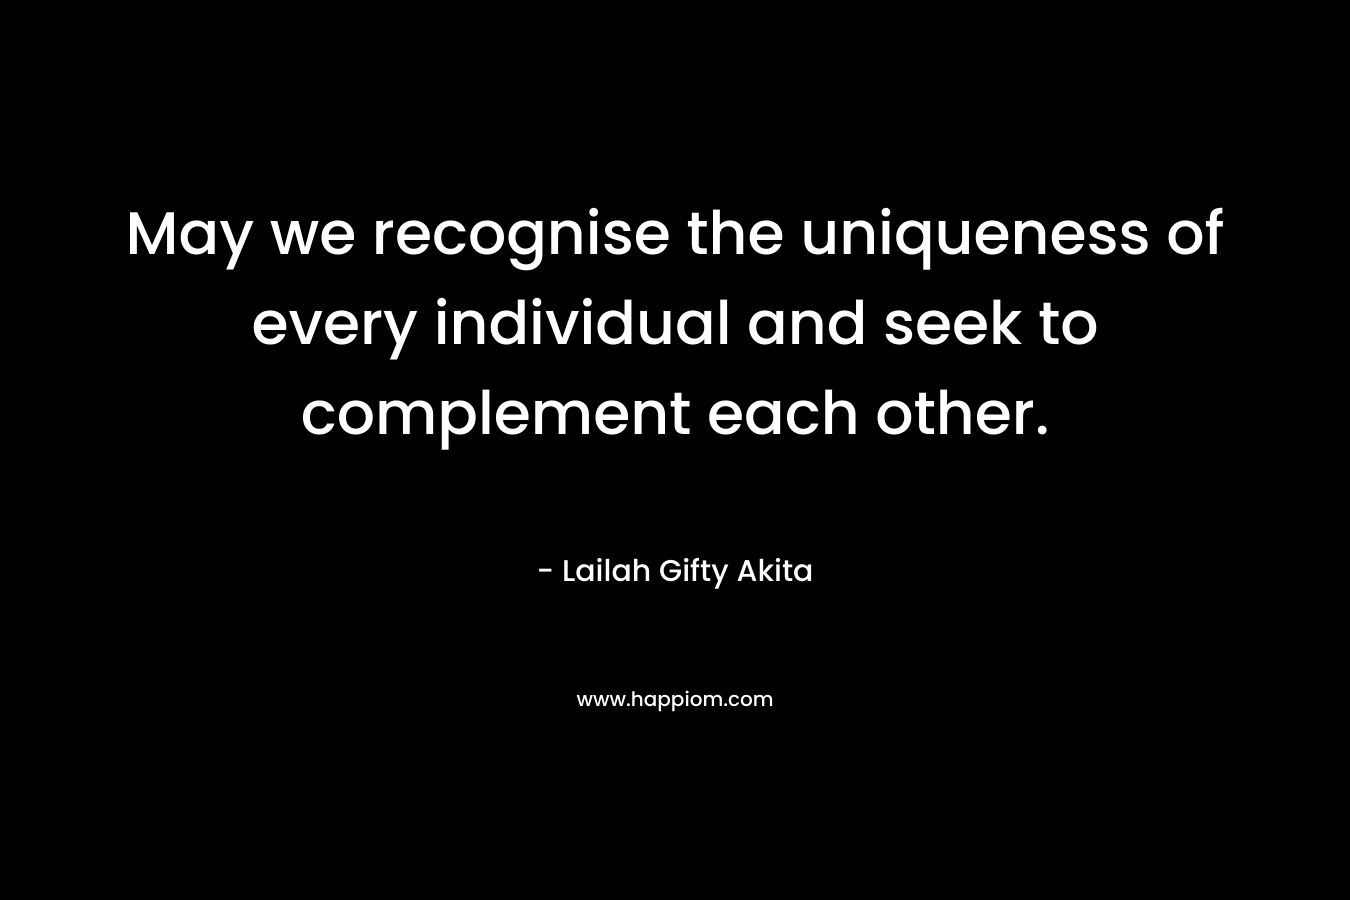 May we recognise the uniqueness of every individual and seek to complement each other.